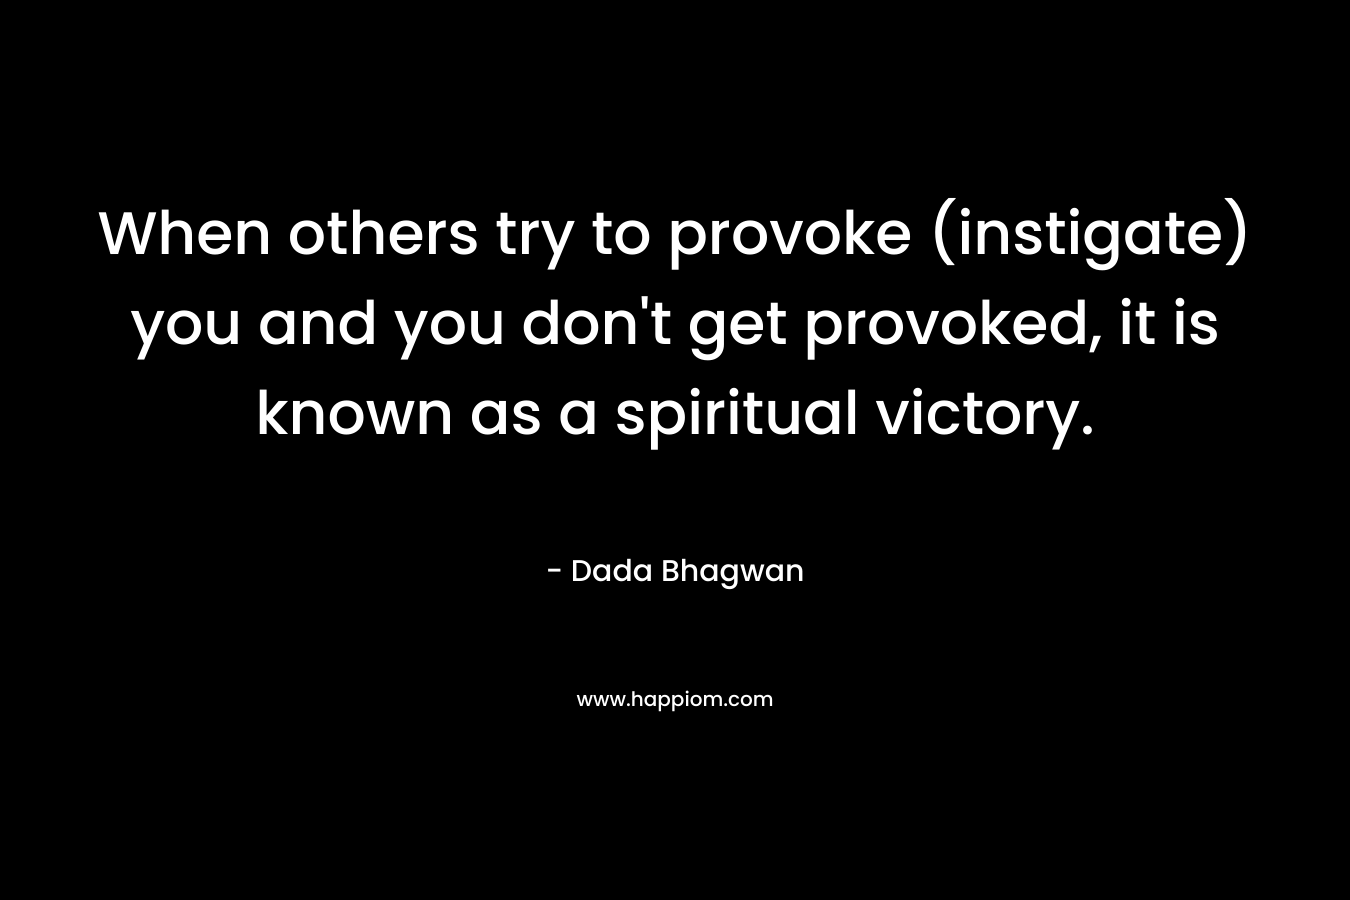 When others try to provoke (instigate) you and you don’t get provoked, it is known as a spiritual victory. – Dada Bhagwan